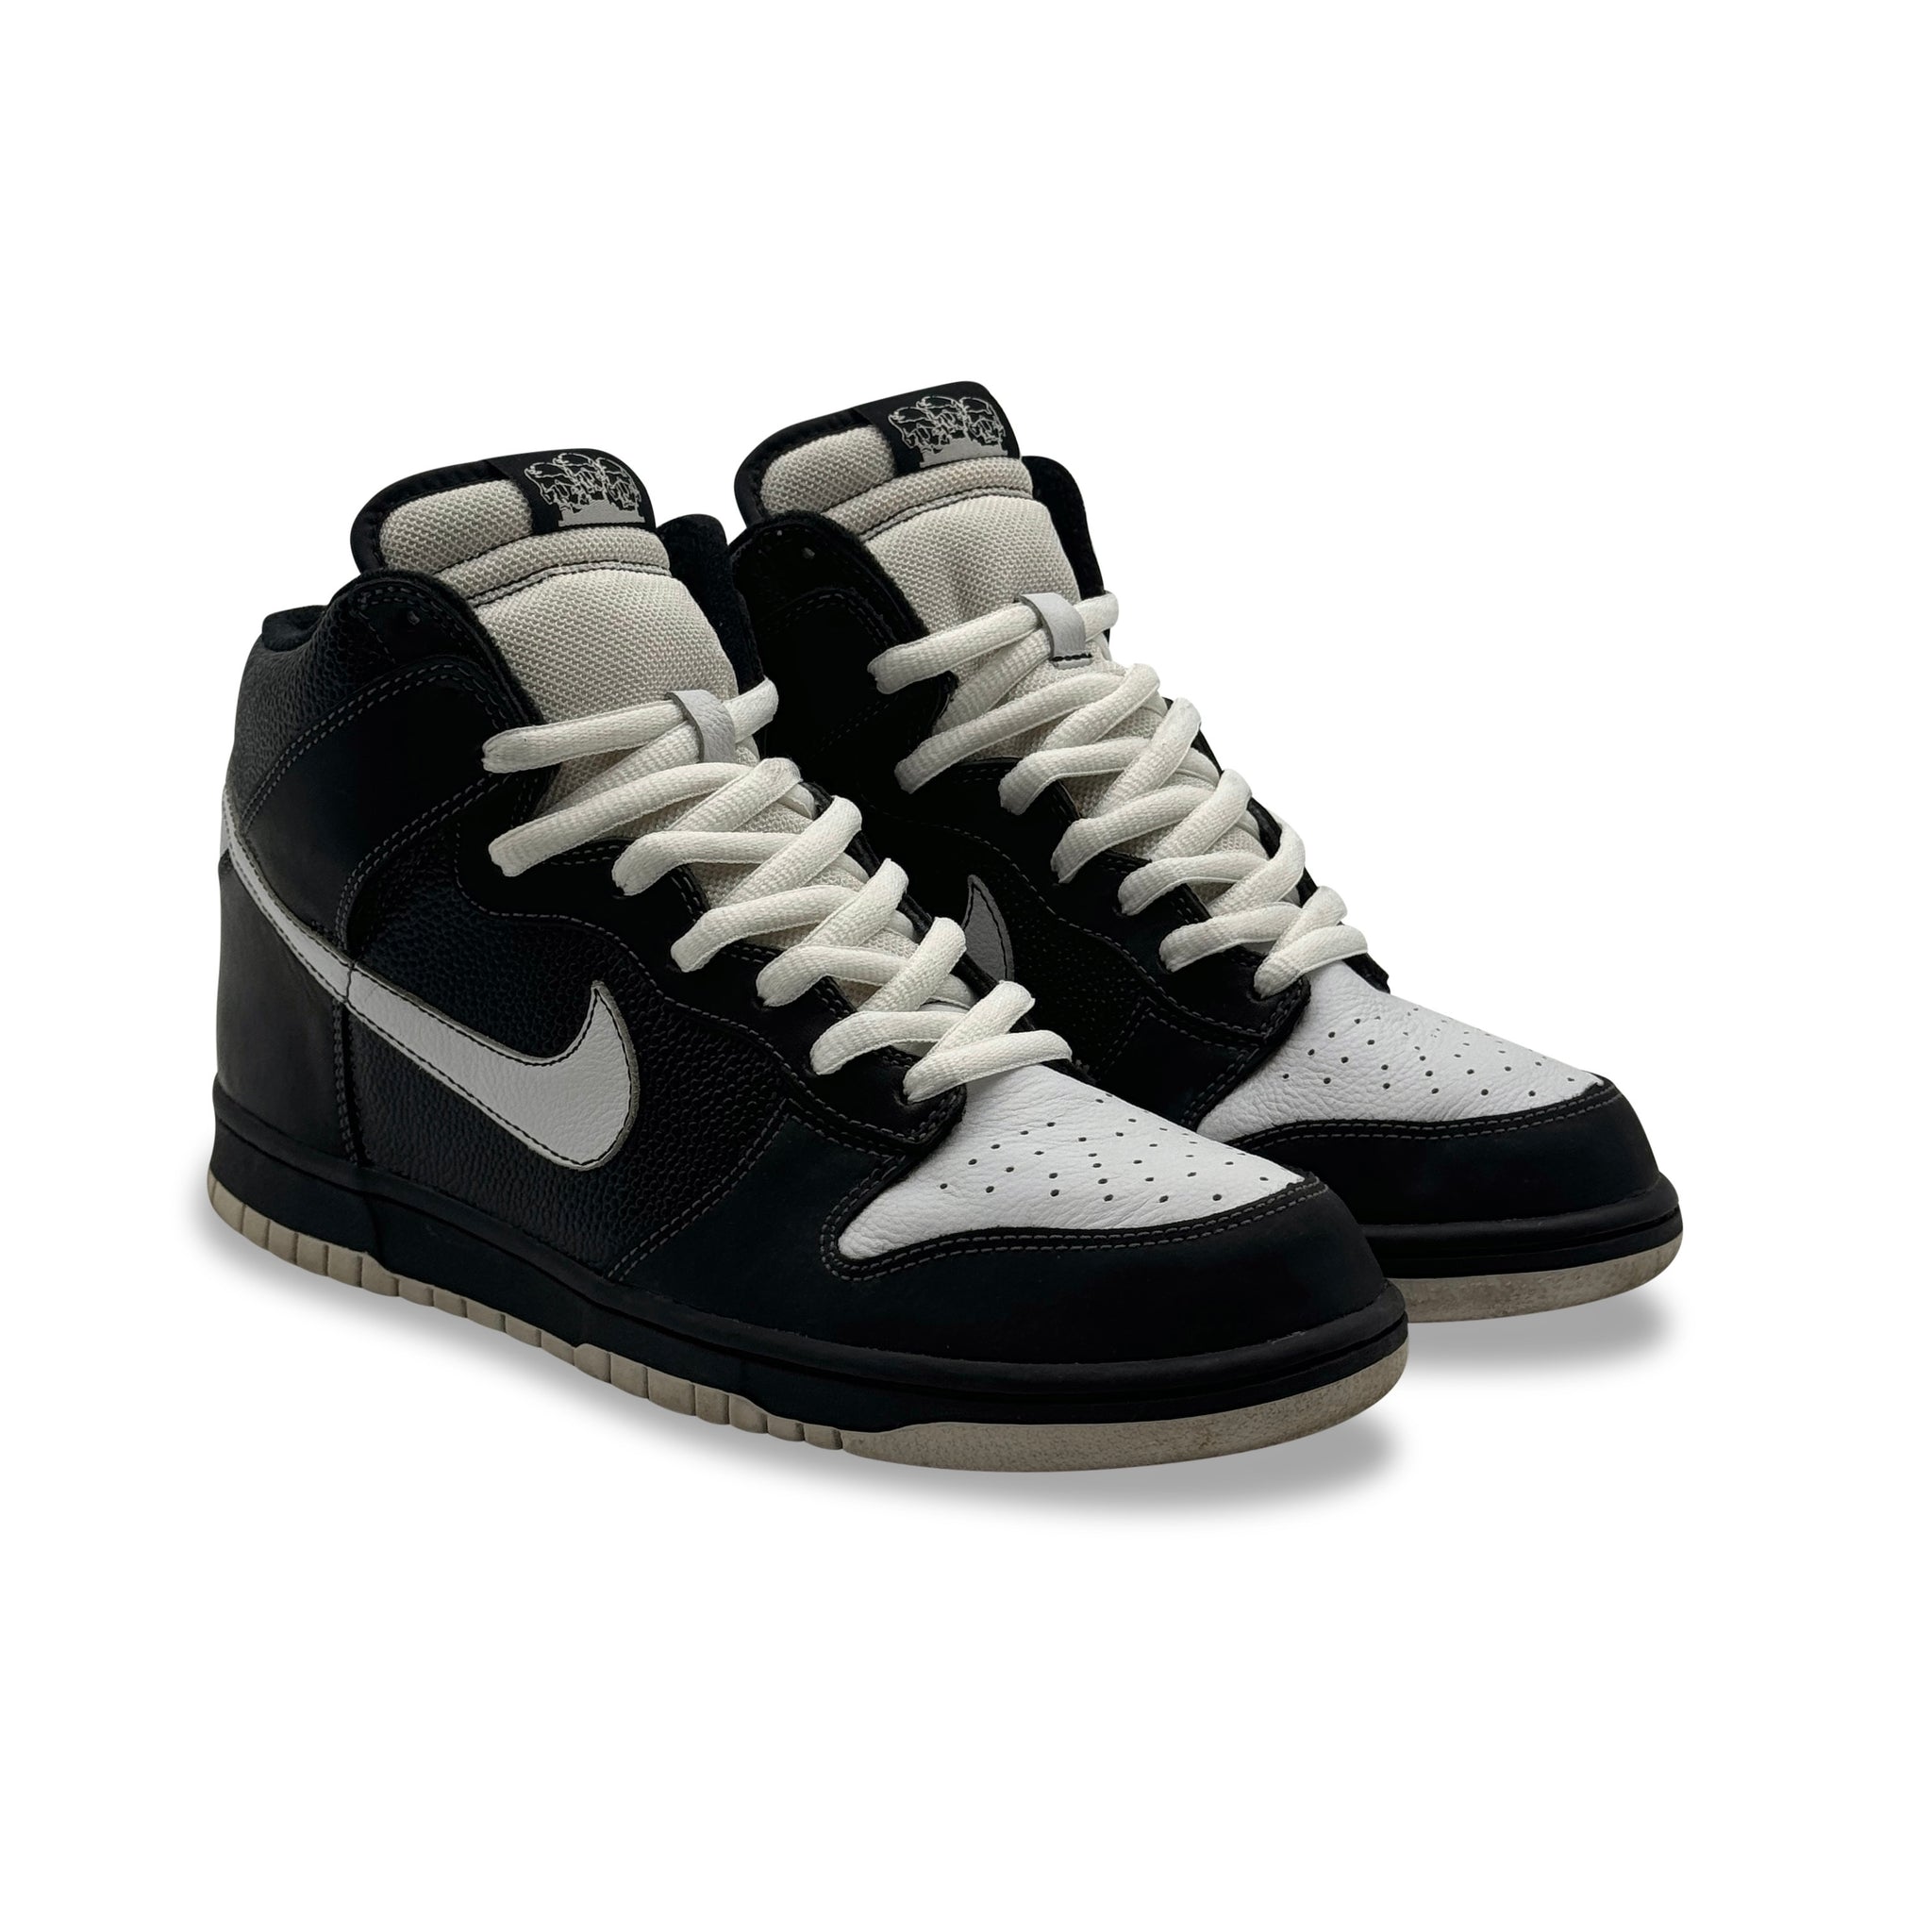 10.5 US - NIKE DUNK HIGH CLERKS NORT RECON W BOX 2006